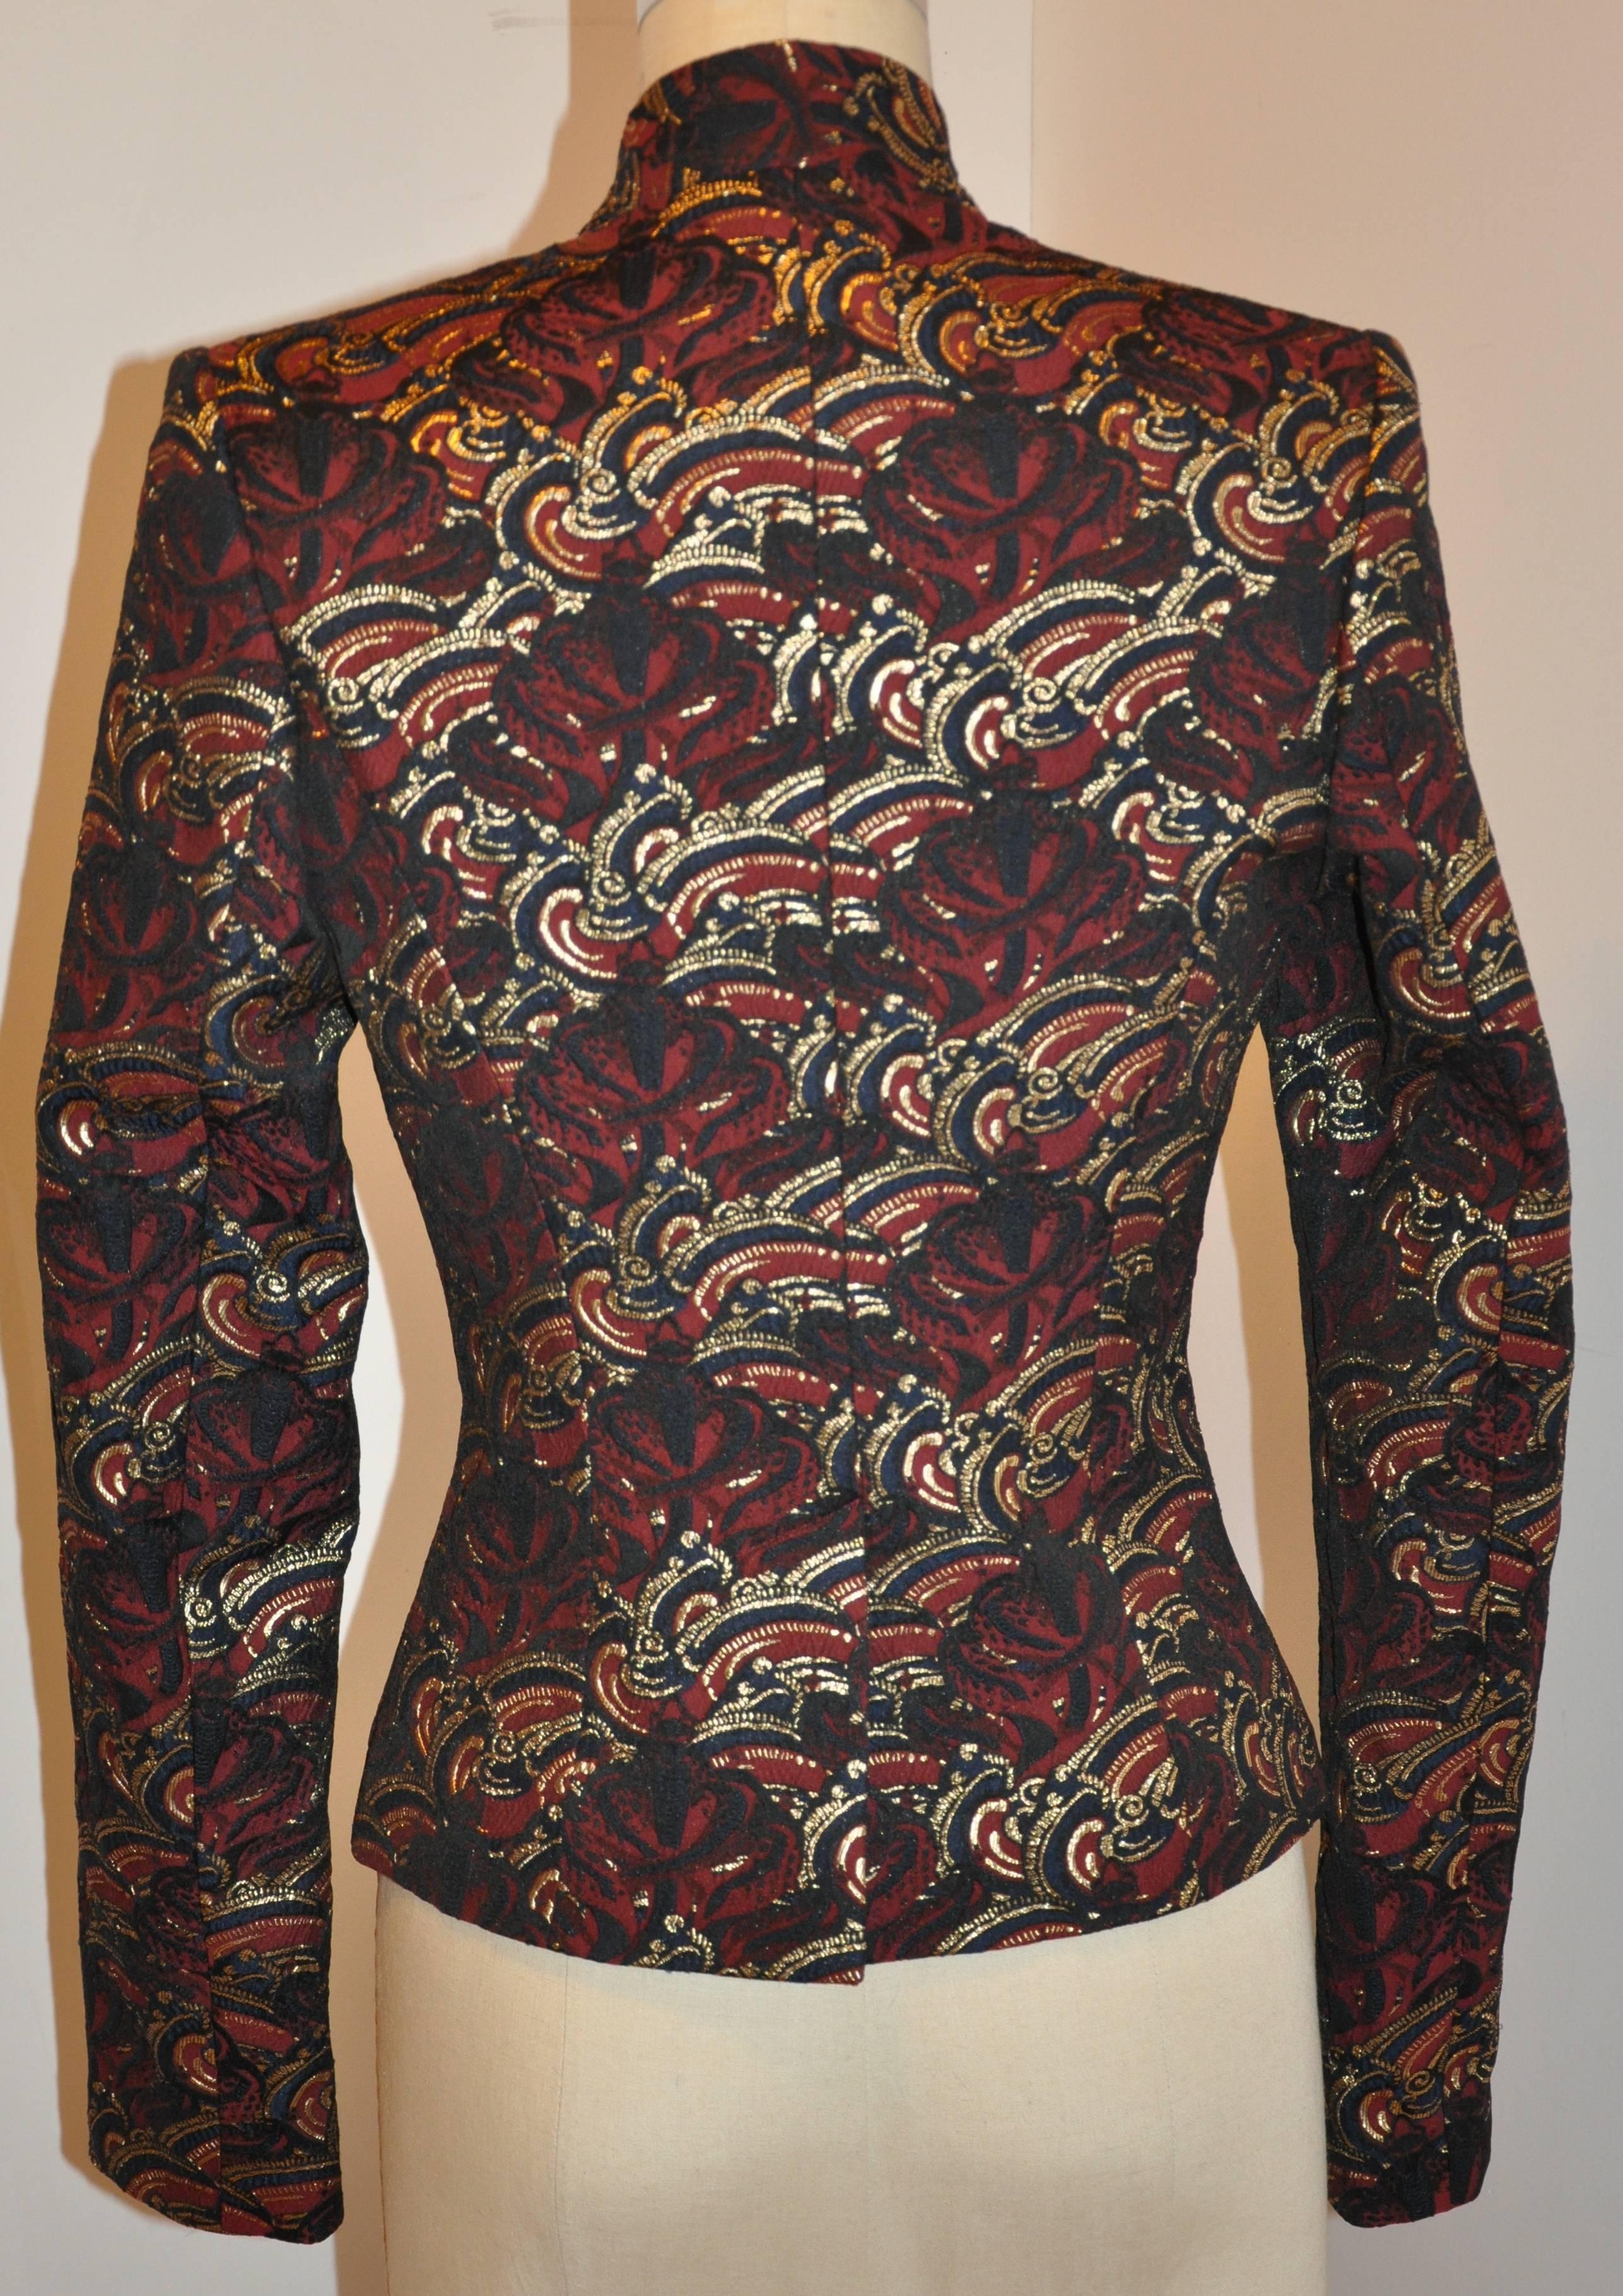        Iconic Kenzo wonderfully elegant kimono style front jacket in multi colors accented with metallic gold thread throughout. The collar stands at 1 3/4